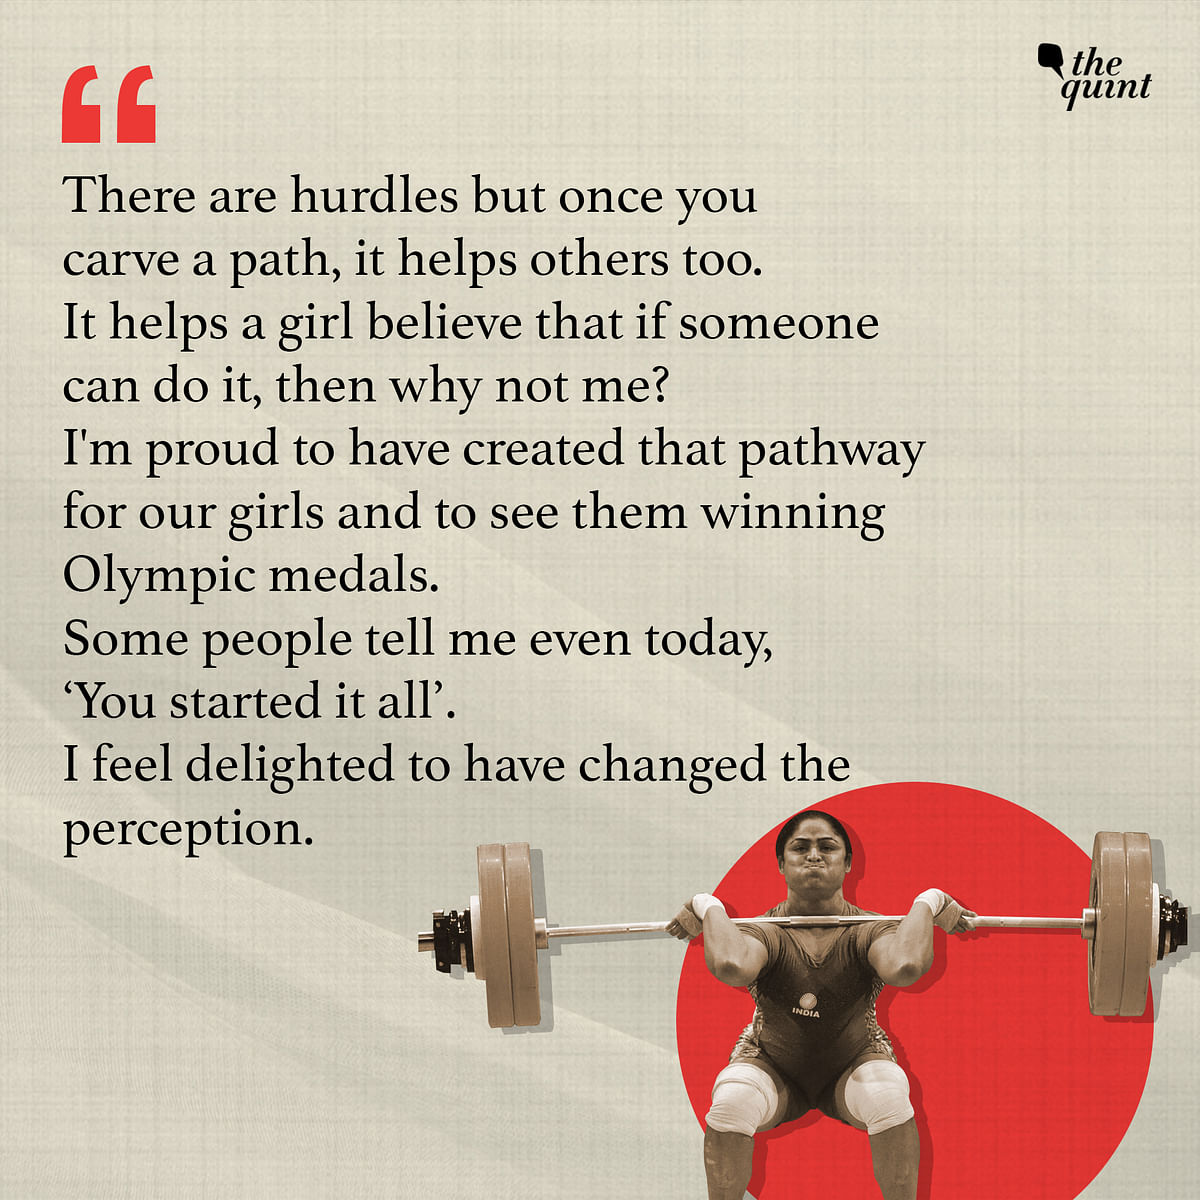 She The First | Karnam Malleswari: An Olympic Legend We Know, a Journey We Don't